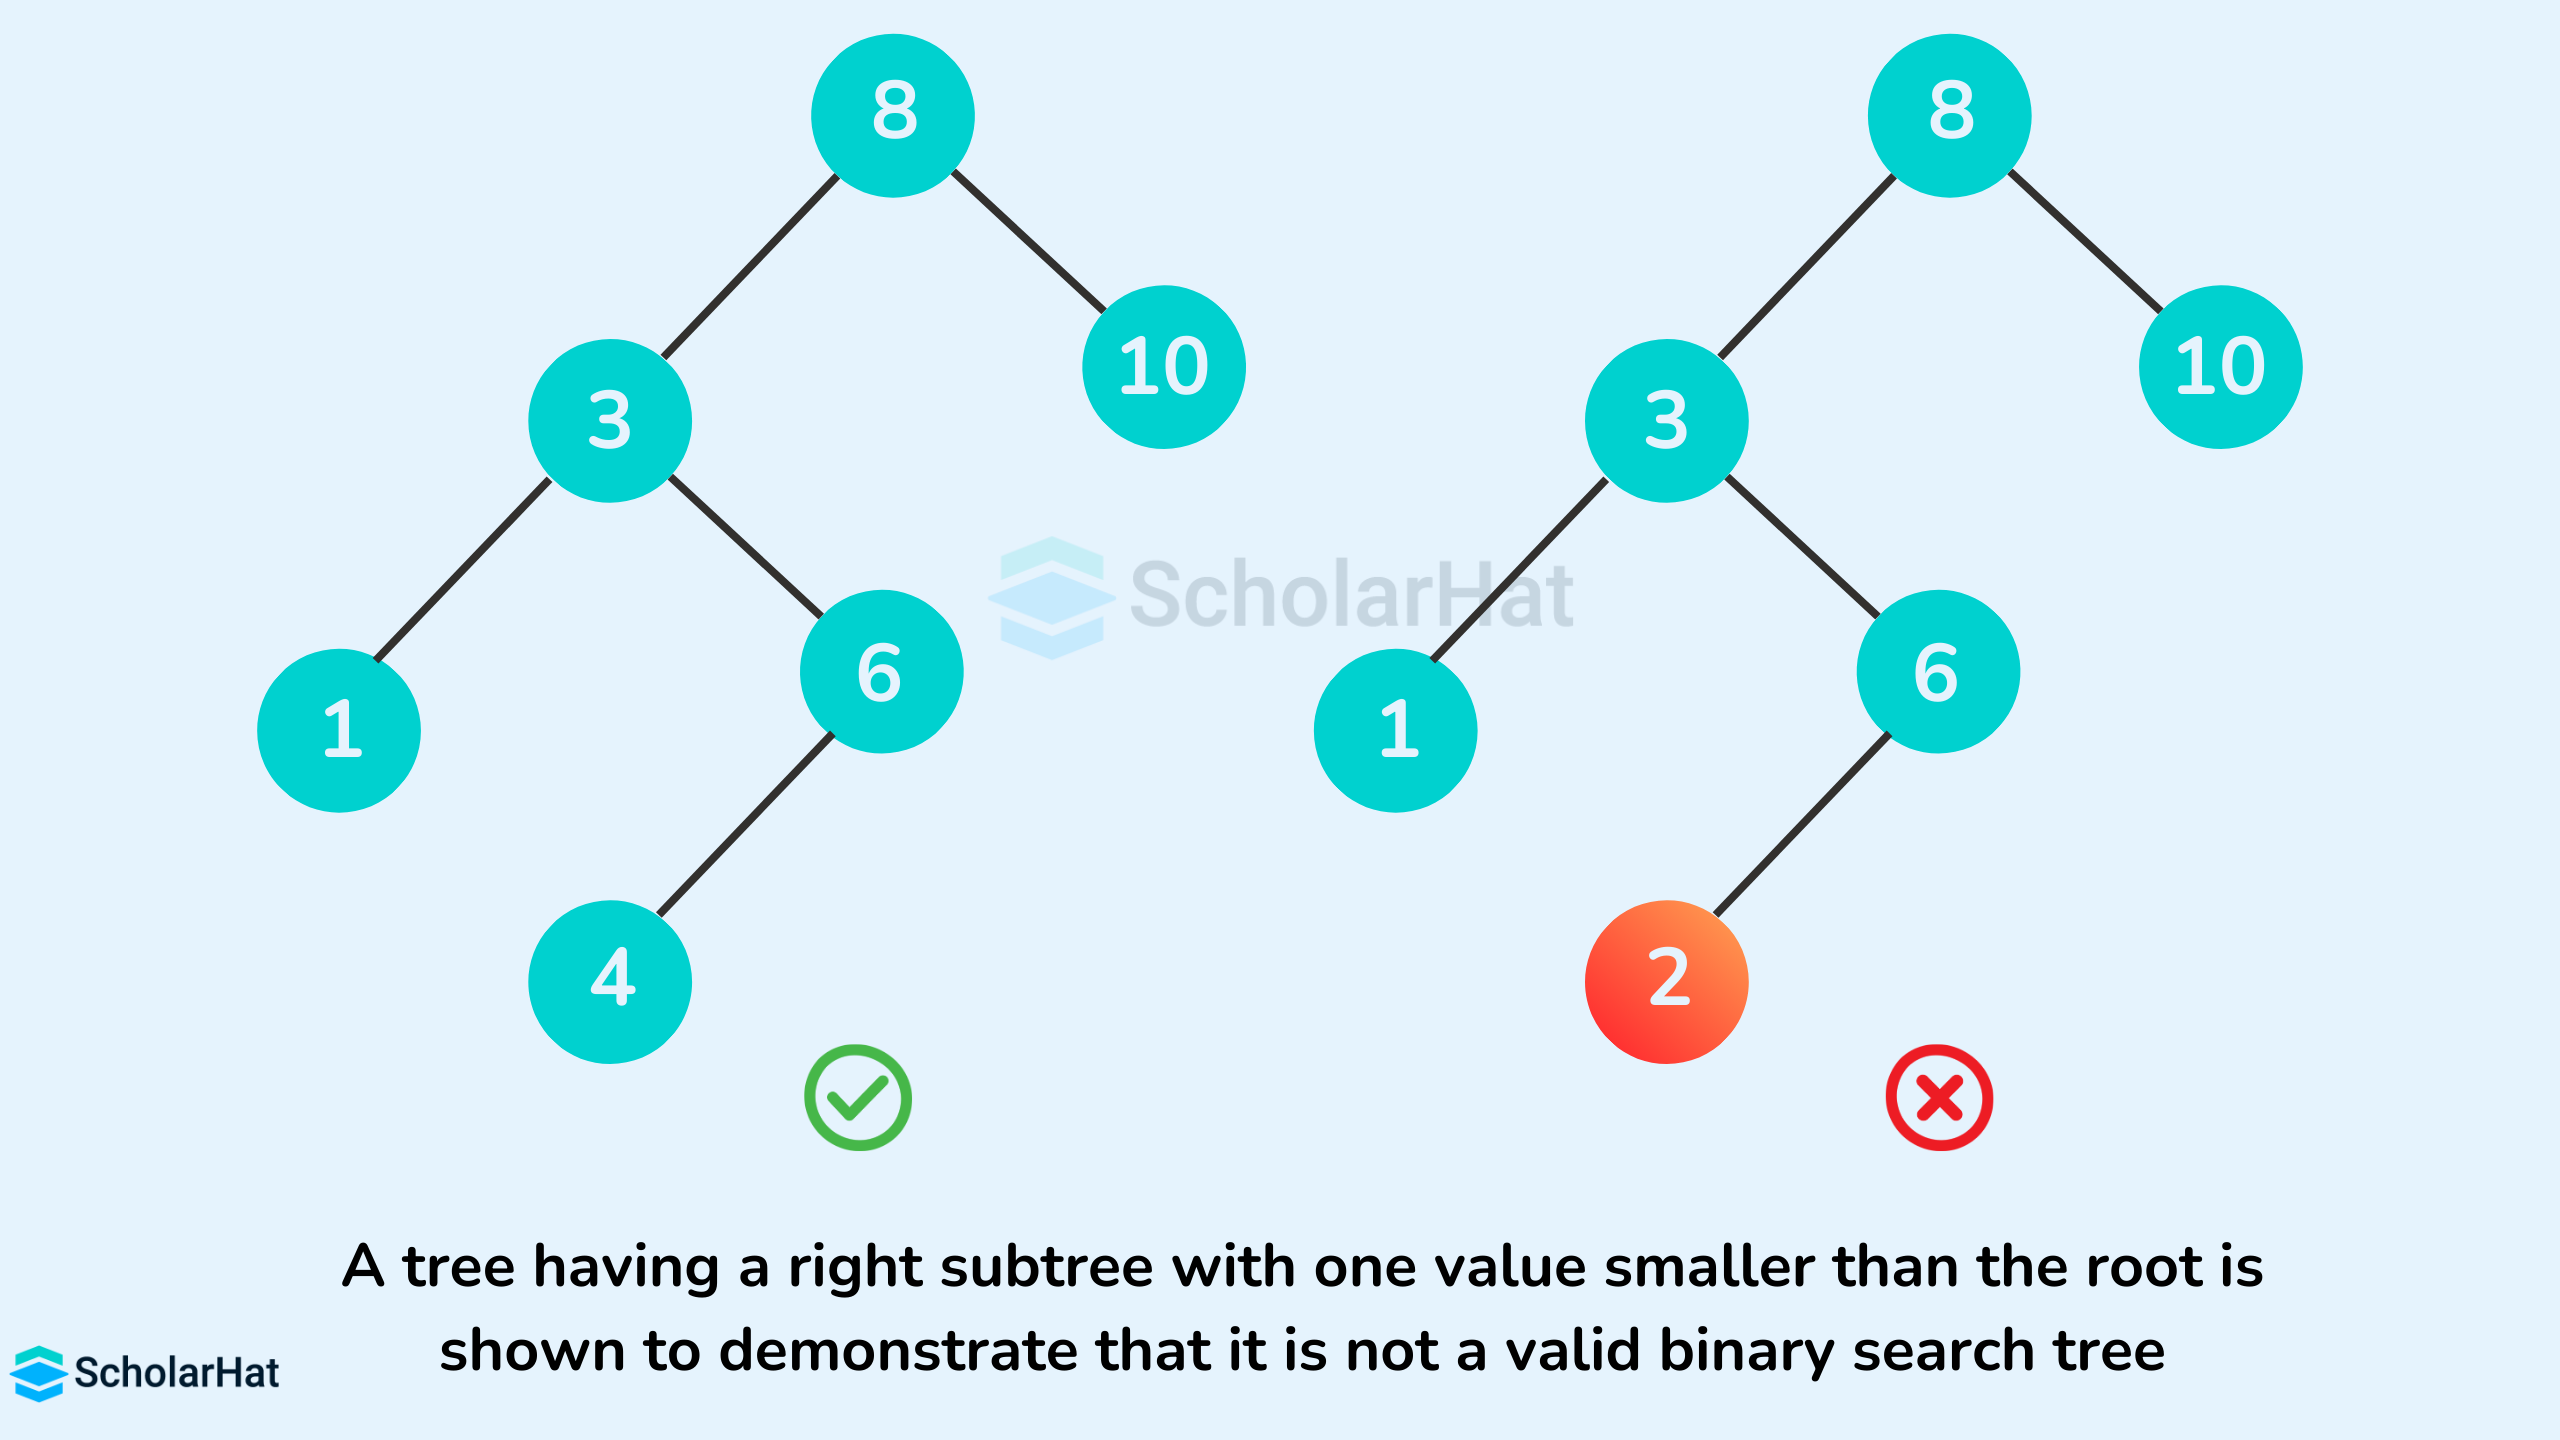 A tree having a right subtree with one value smaller than the root is shown to demonstrate that it is not a valid binary search tree